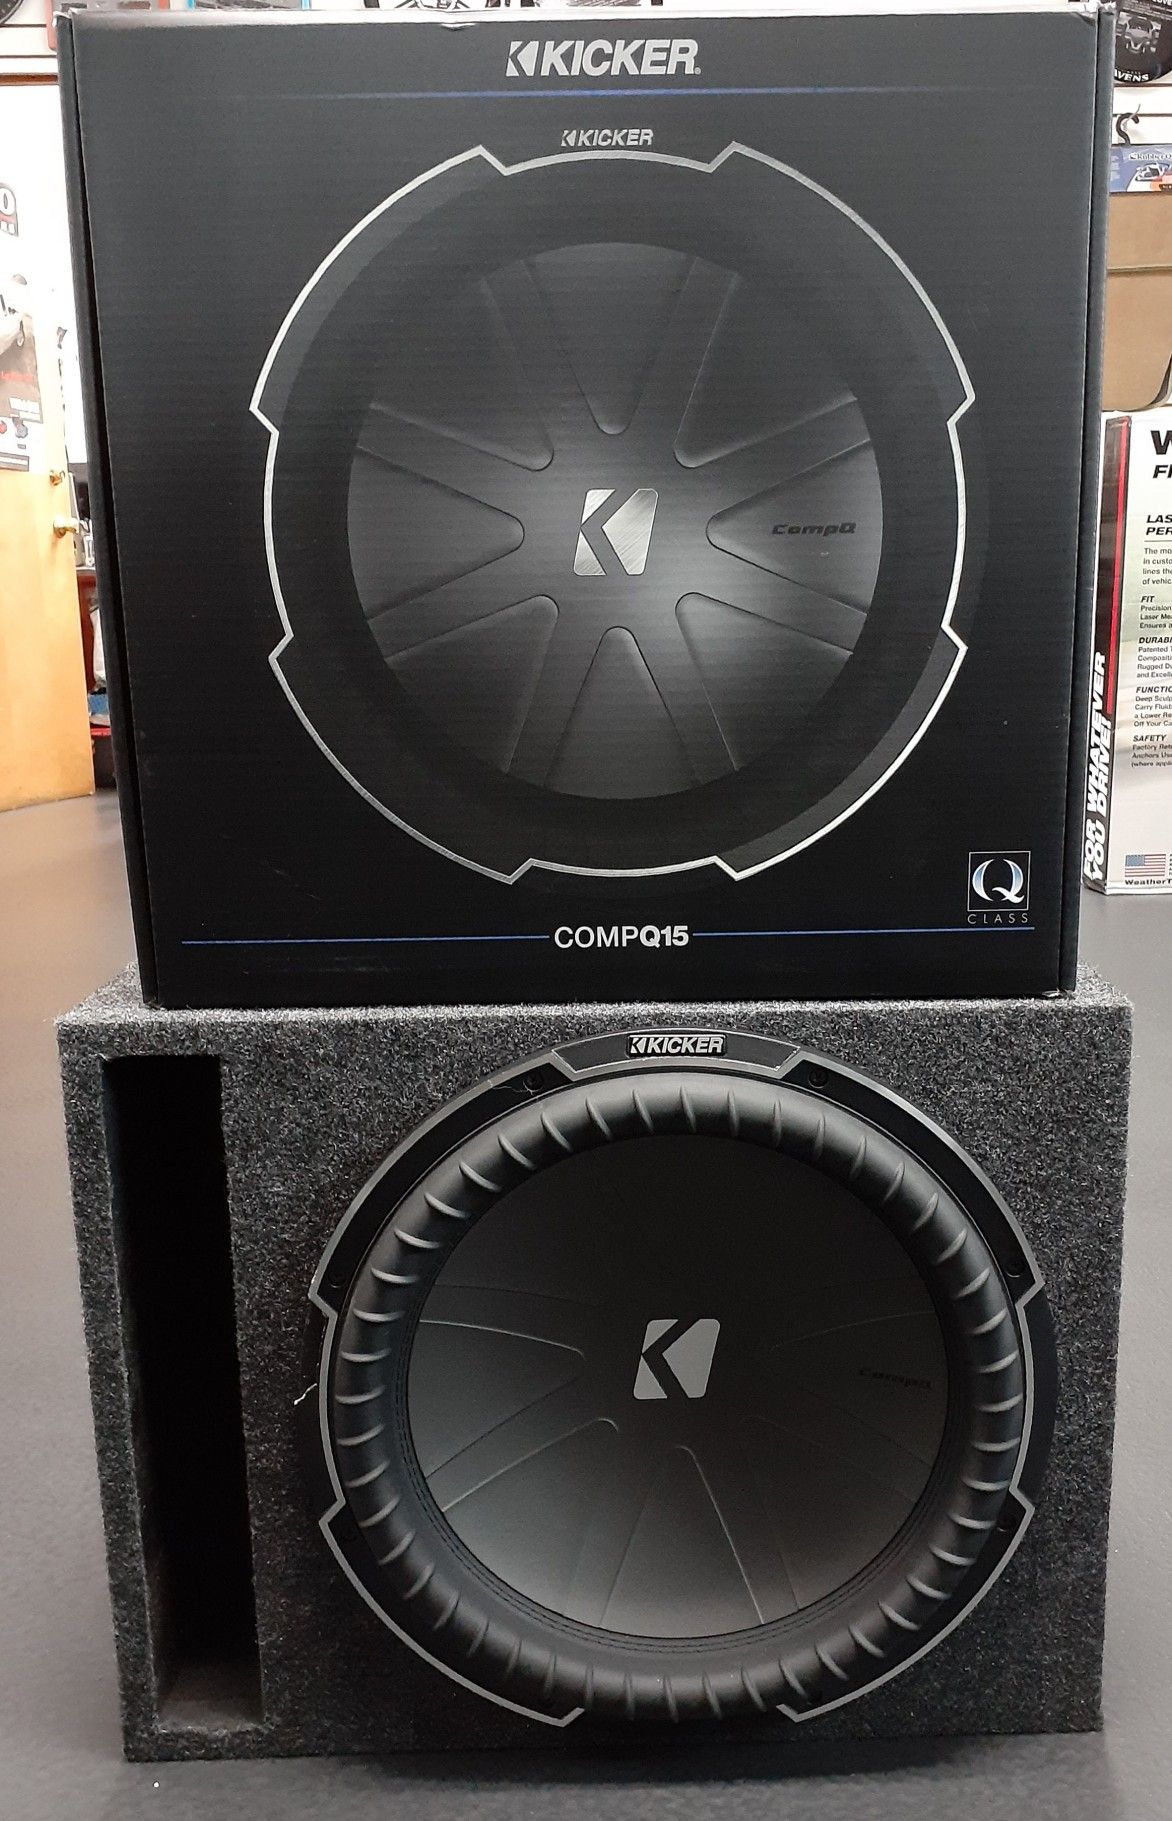 NEW! 15 in Kicker Q Series subwoofer system